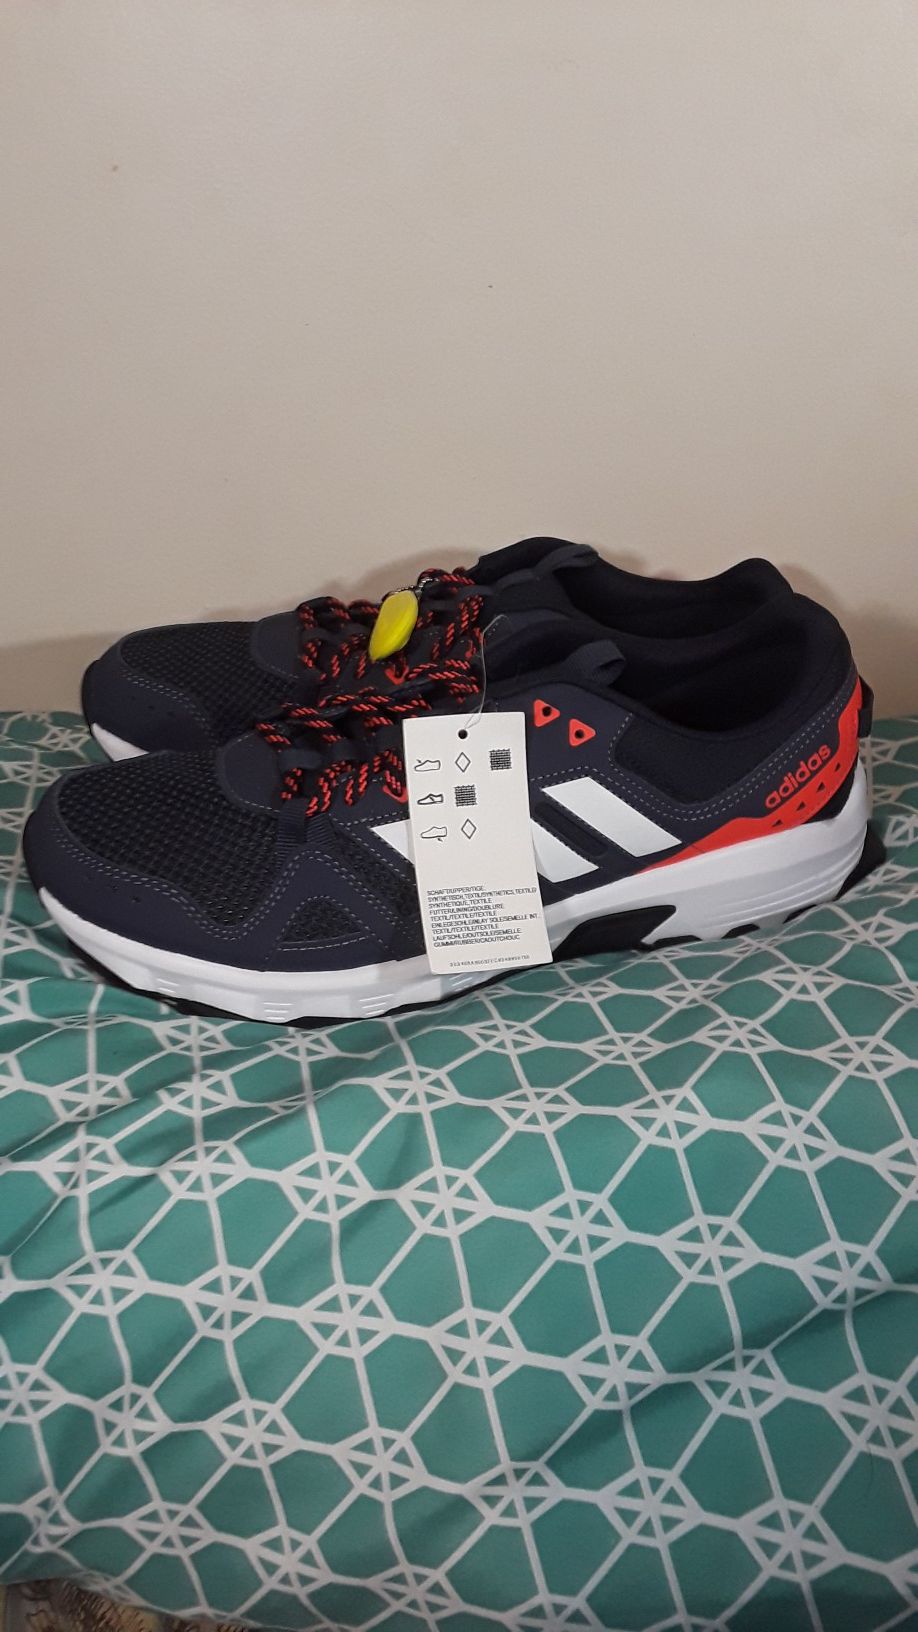 Adidas shoes for men? Size 9.5